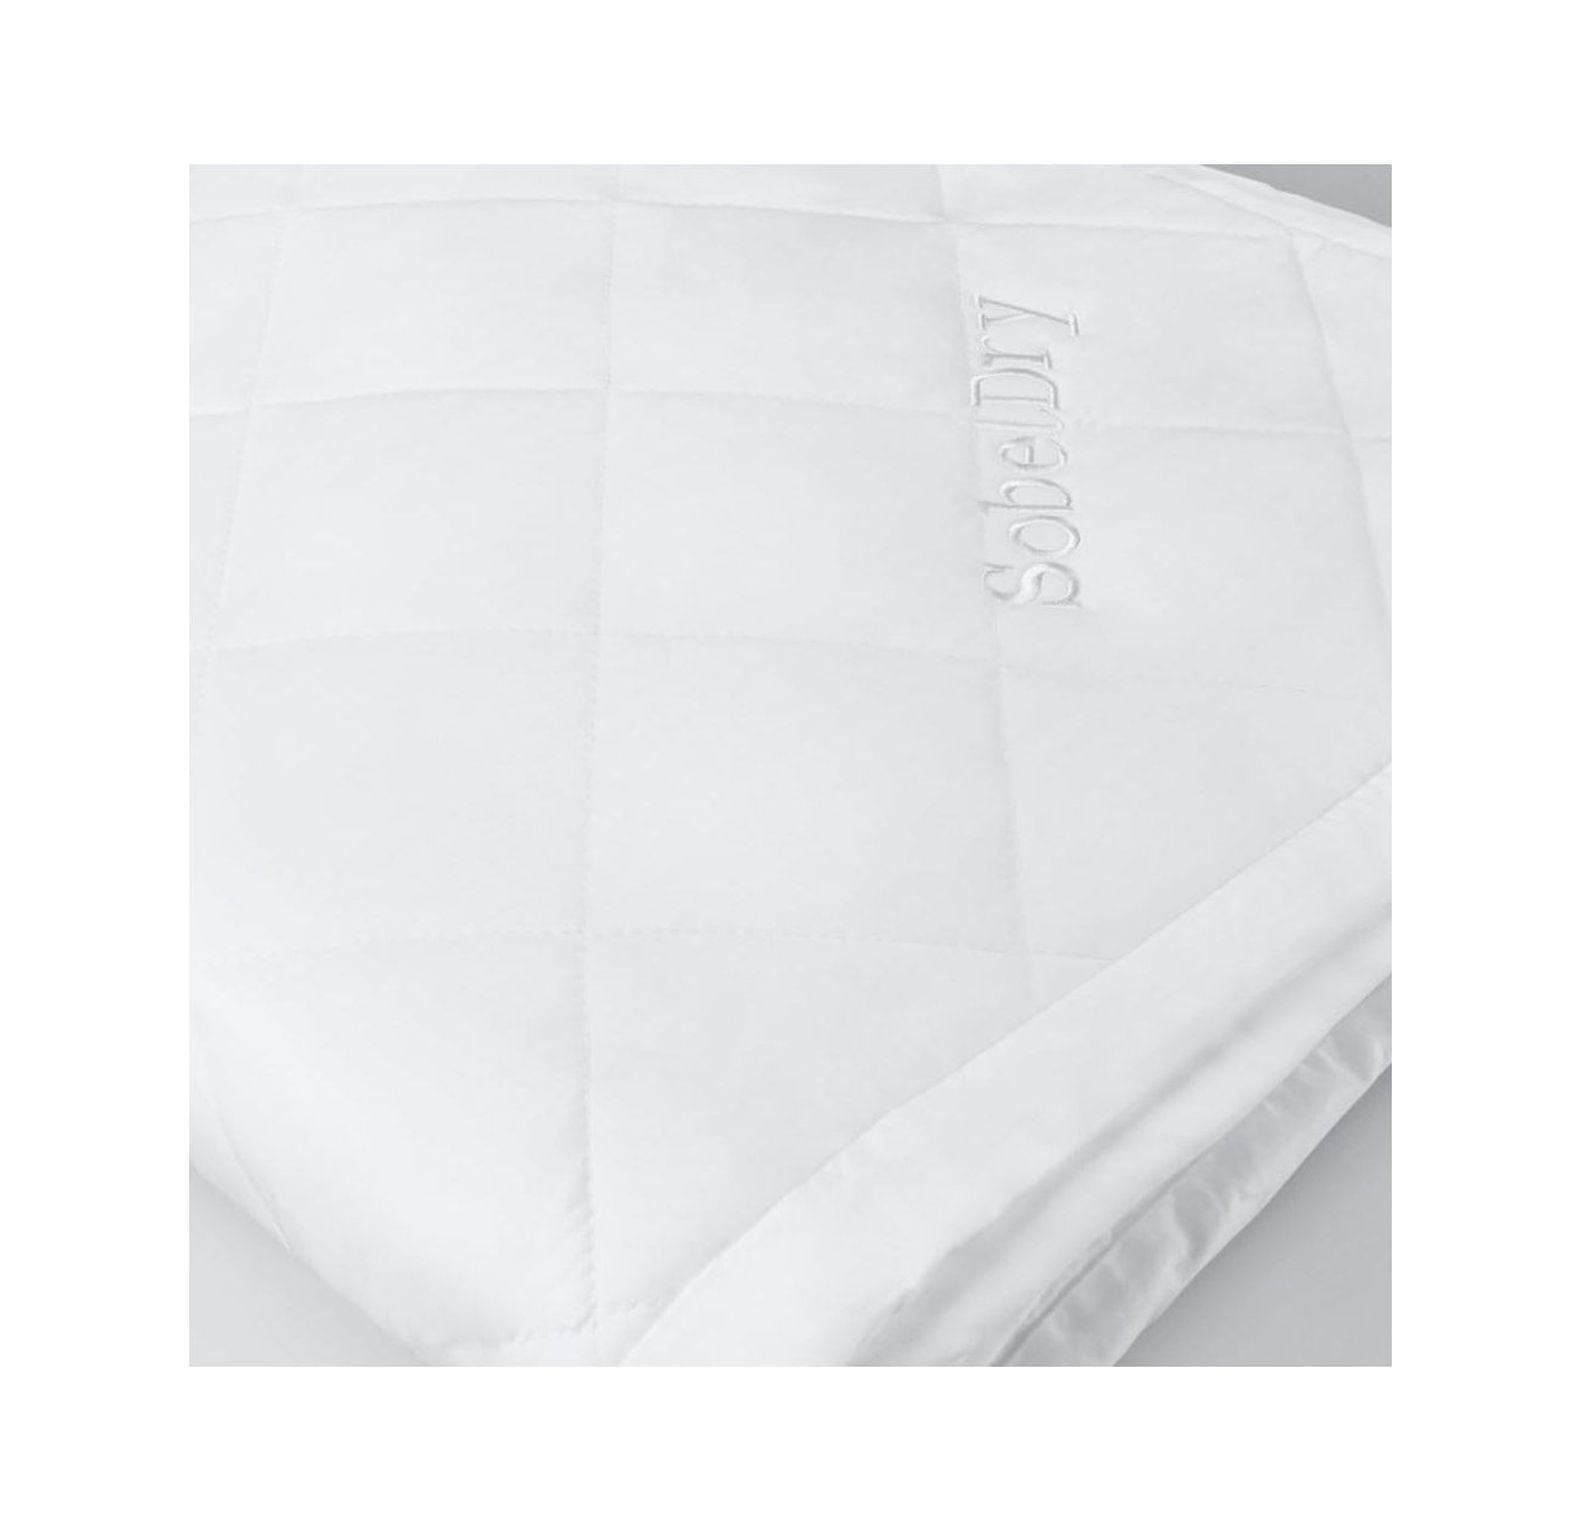 CodYinFI: Hotel Sobel Dry Hypoallergenic Mattress Pad | Hotel & Resort  Quality, 100% Water Resistant, Quiet, Soft & Supportive Microfiber Fill 